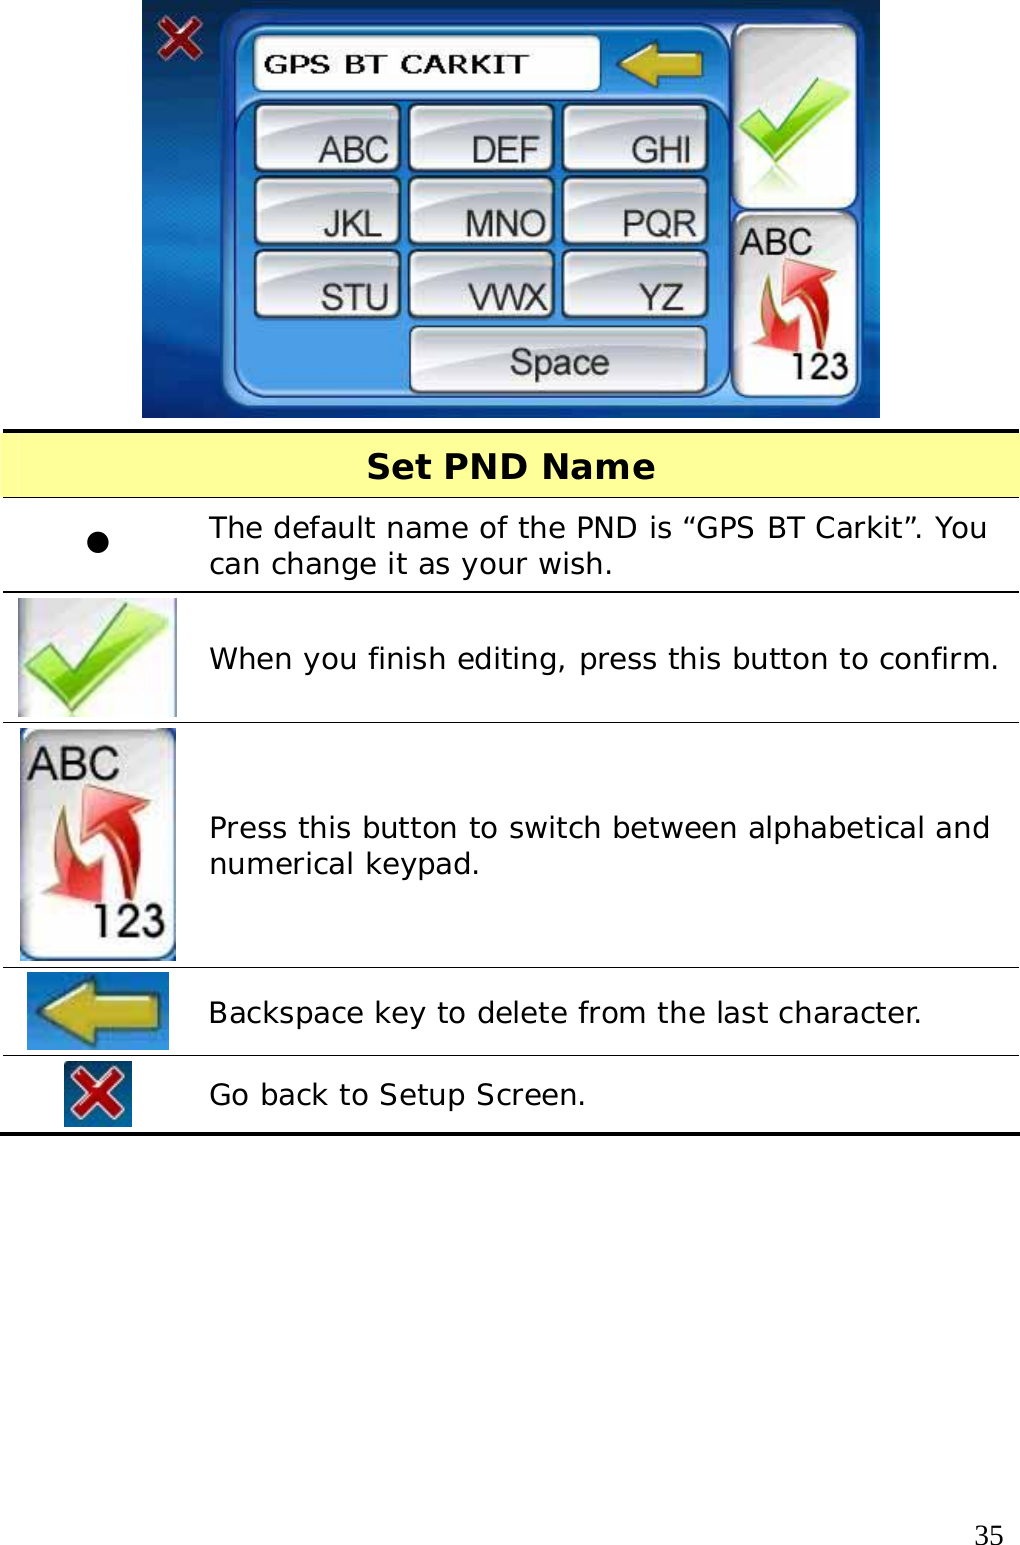  35  Set PND Name z The default name of the PND is “GPS BT Carkit”. You can change it as your wish.  When you finish editing, press this button to confirm.  Press this button to switch between alphabetical and numerical keypad.  Backspace key to delete from the last character.  Go back to Setup Screen.  